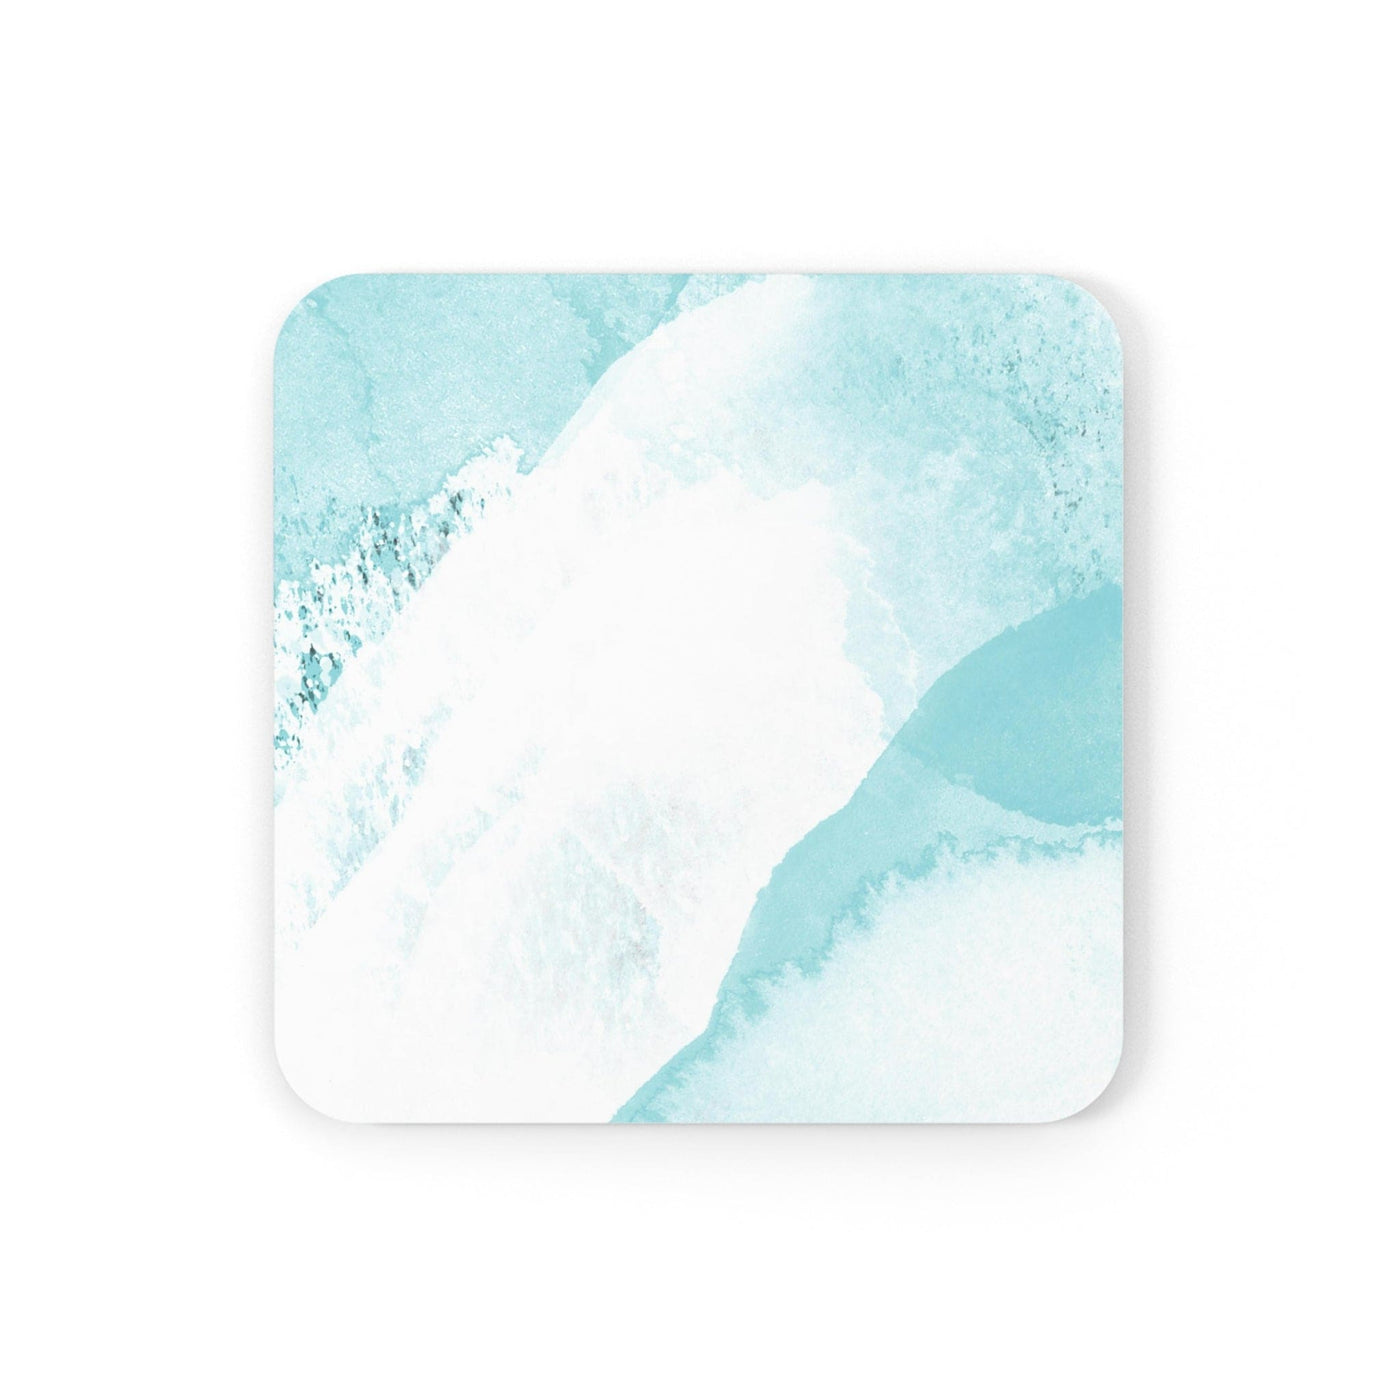 Handcrafted Square Coaster Set Of 4 For Drinks And Cups Subtle Abstract Ocean